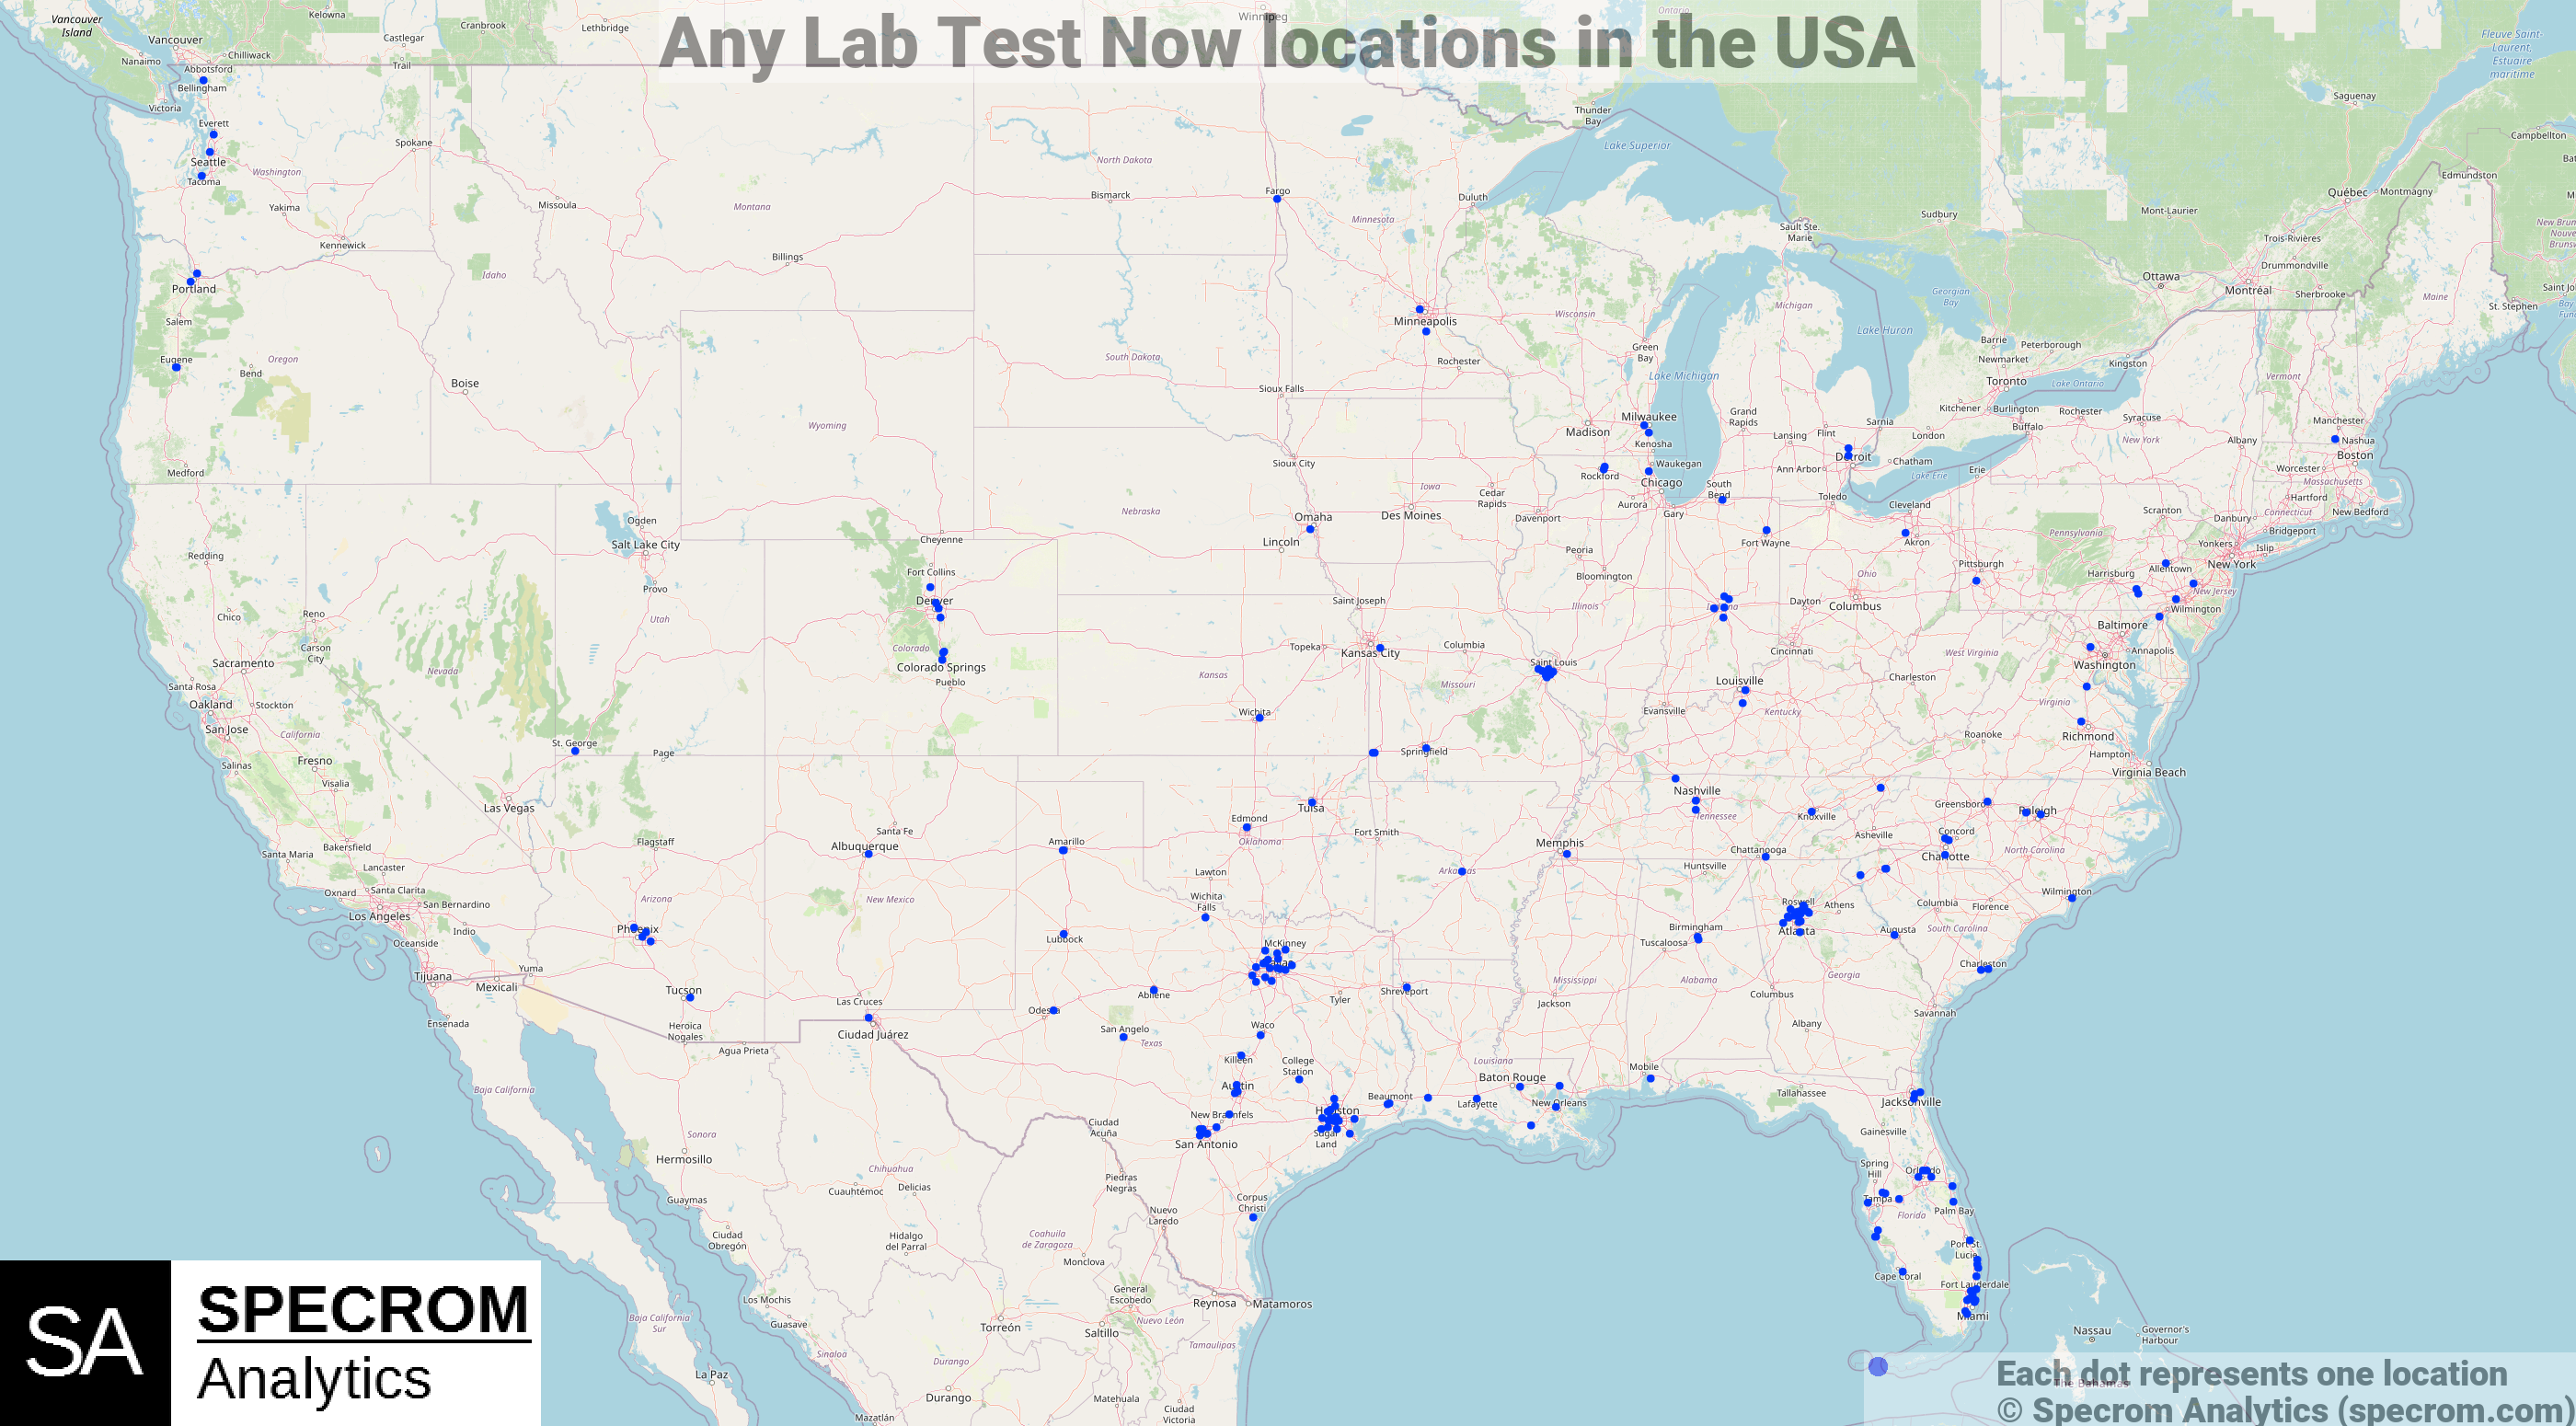 Any Lab Test Now locations in the USA